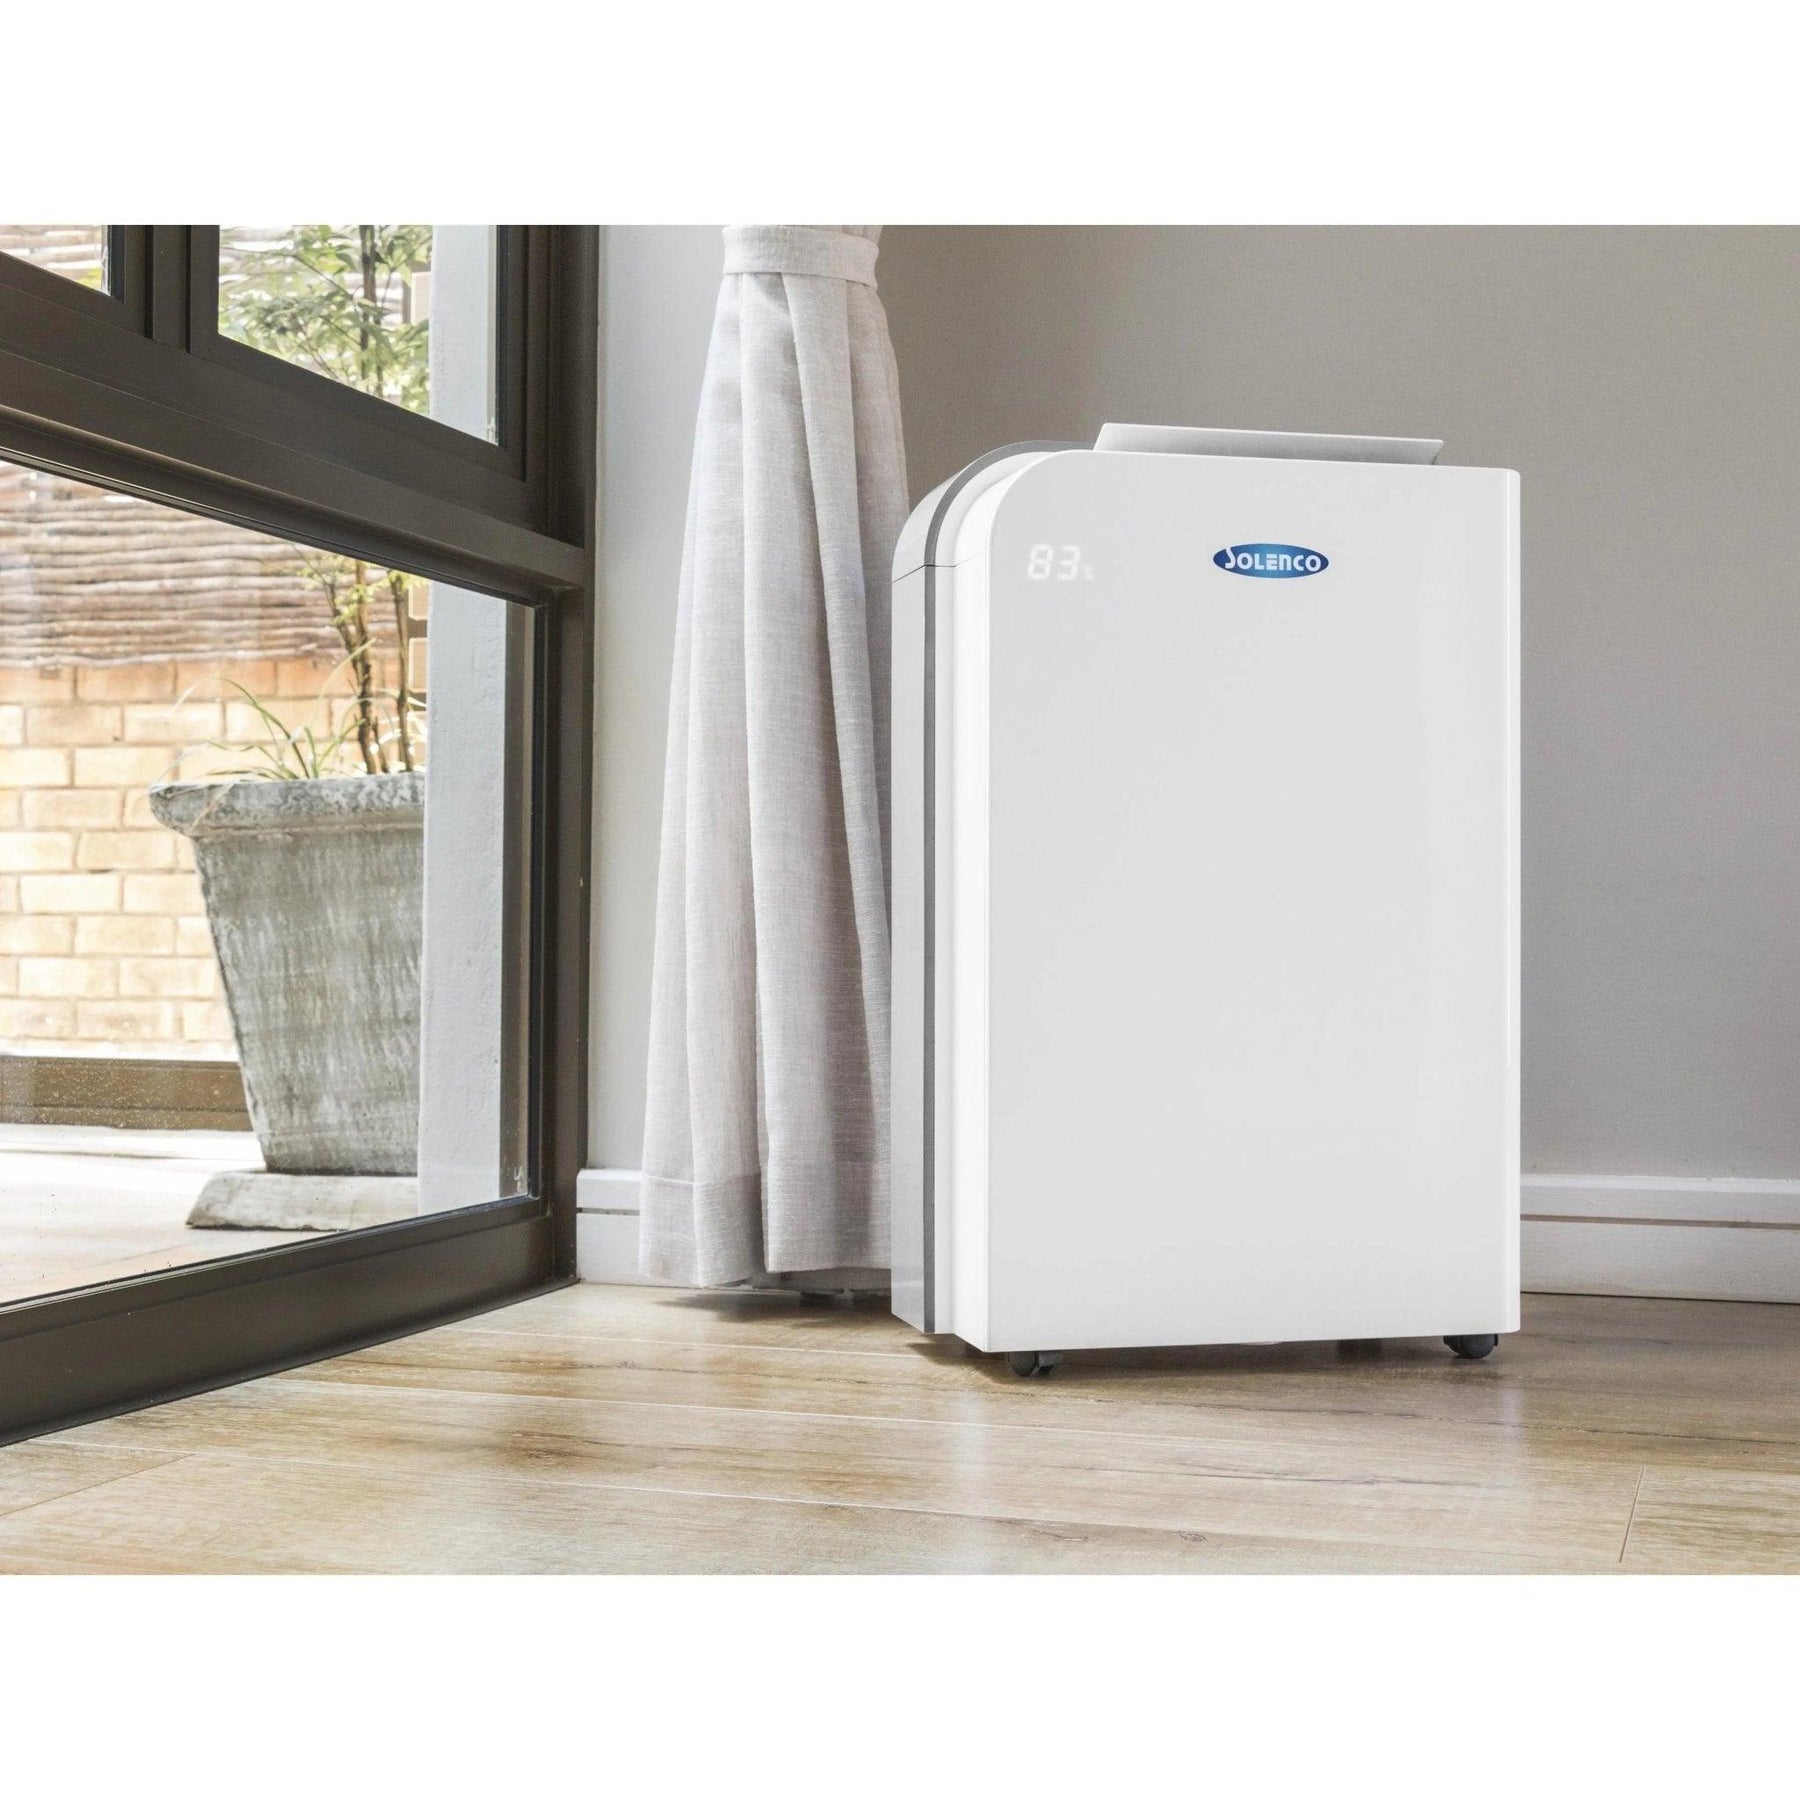 10 Benefits of buying a Dehumidifier & Air Purifier combo unit. - Solenco South Africa